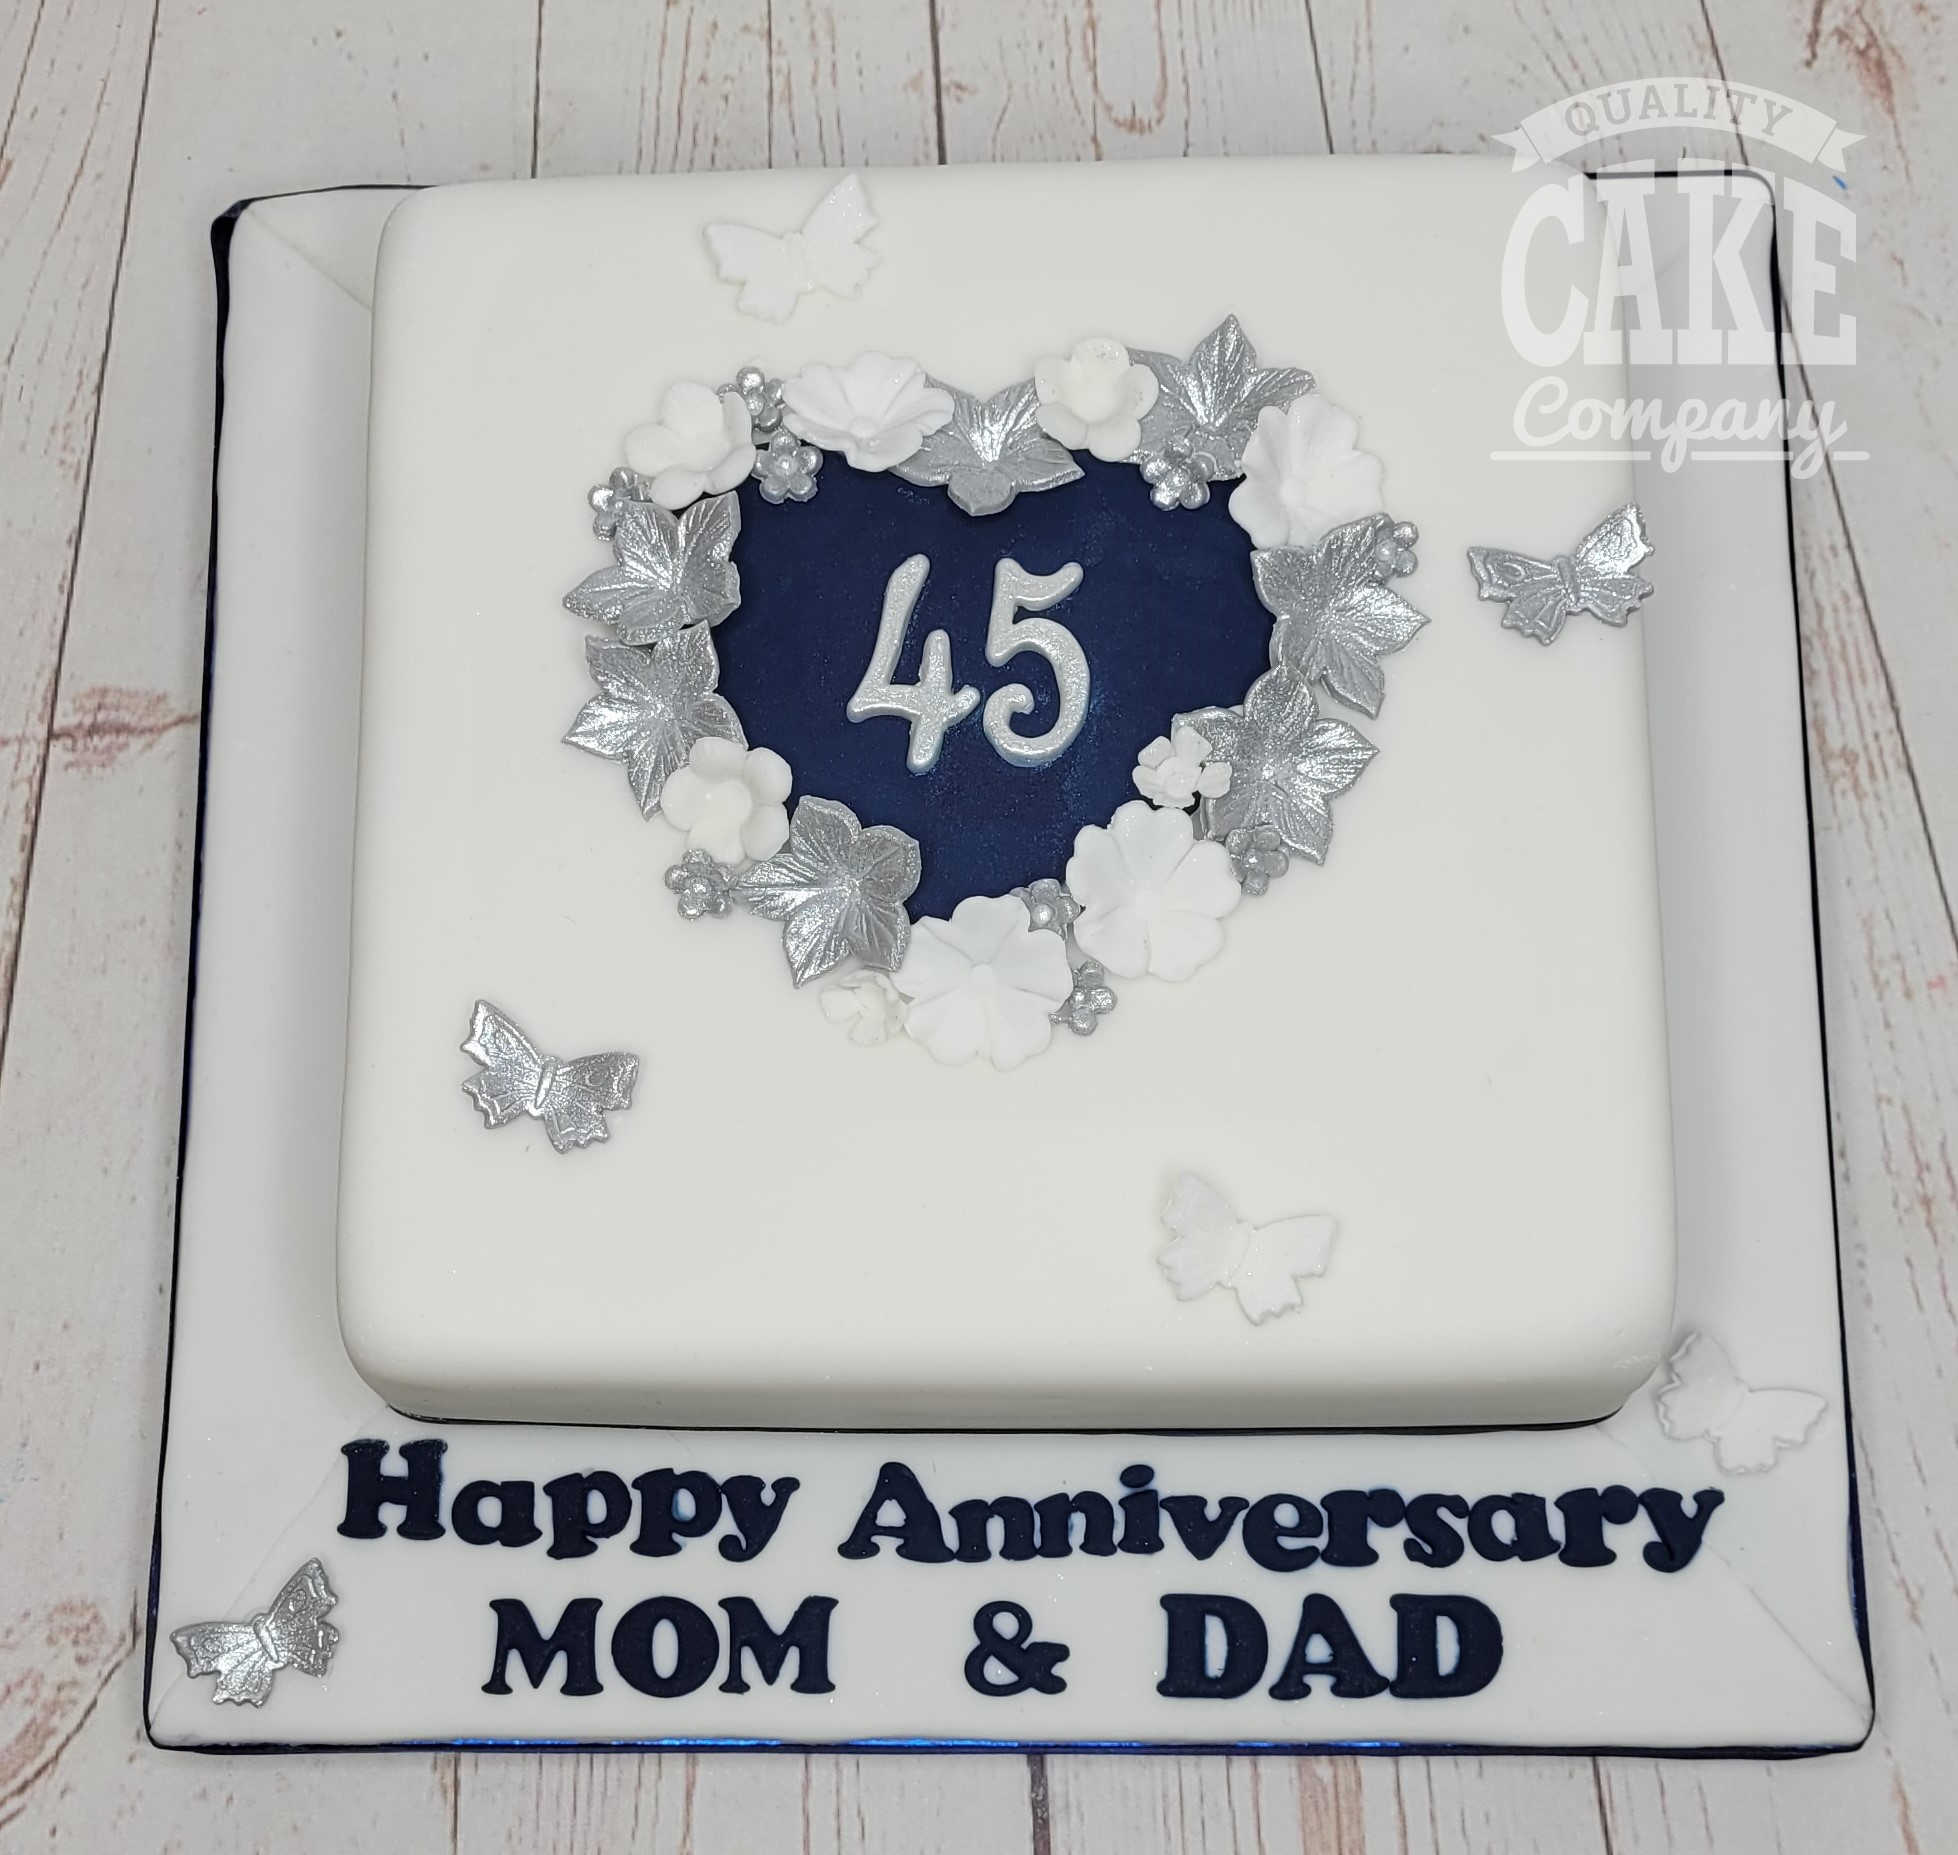 About the 4th anniversary 'mini' cake I wish they can all eat the cake to  celebrate their stay in the Manor for at least 3-4 years. I guess most  characters don't eat at all : r/IdentityV